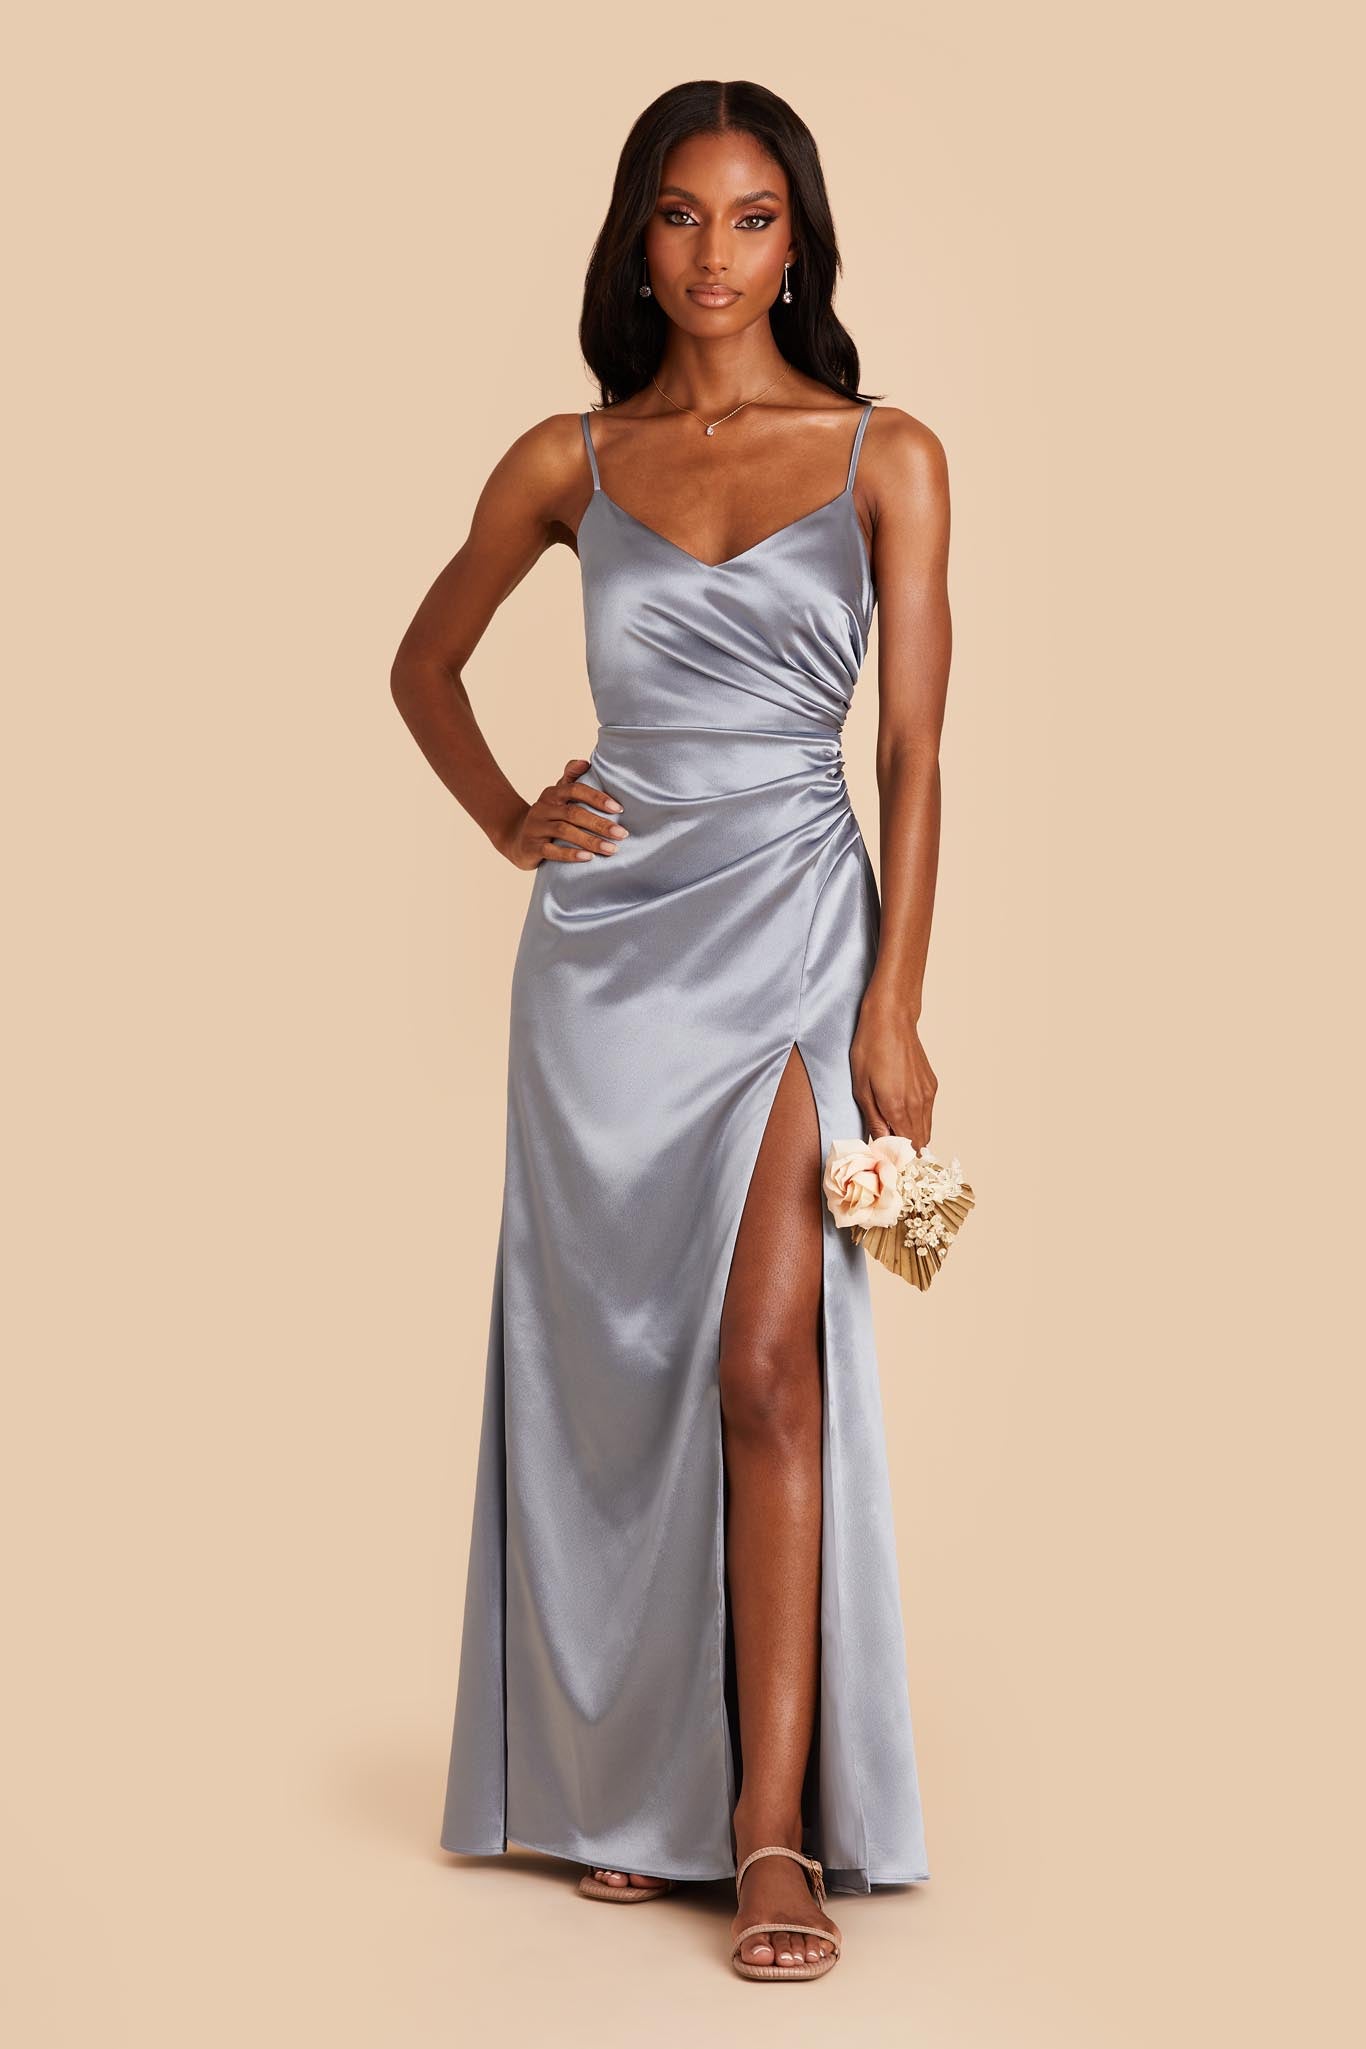 Silver Gray Infinity Bridesmaid Dress in + 36 Colors